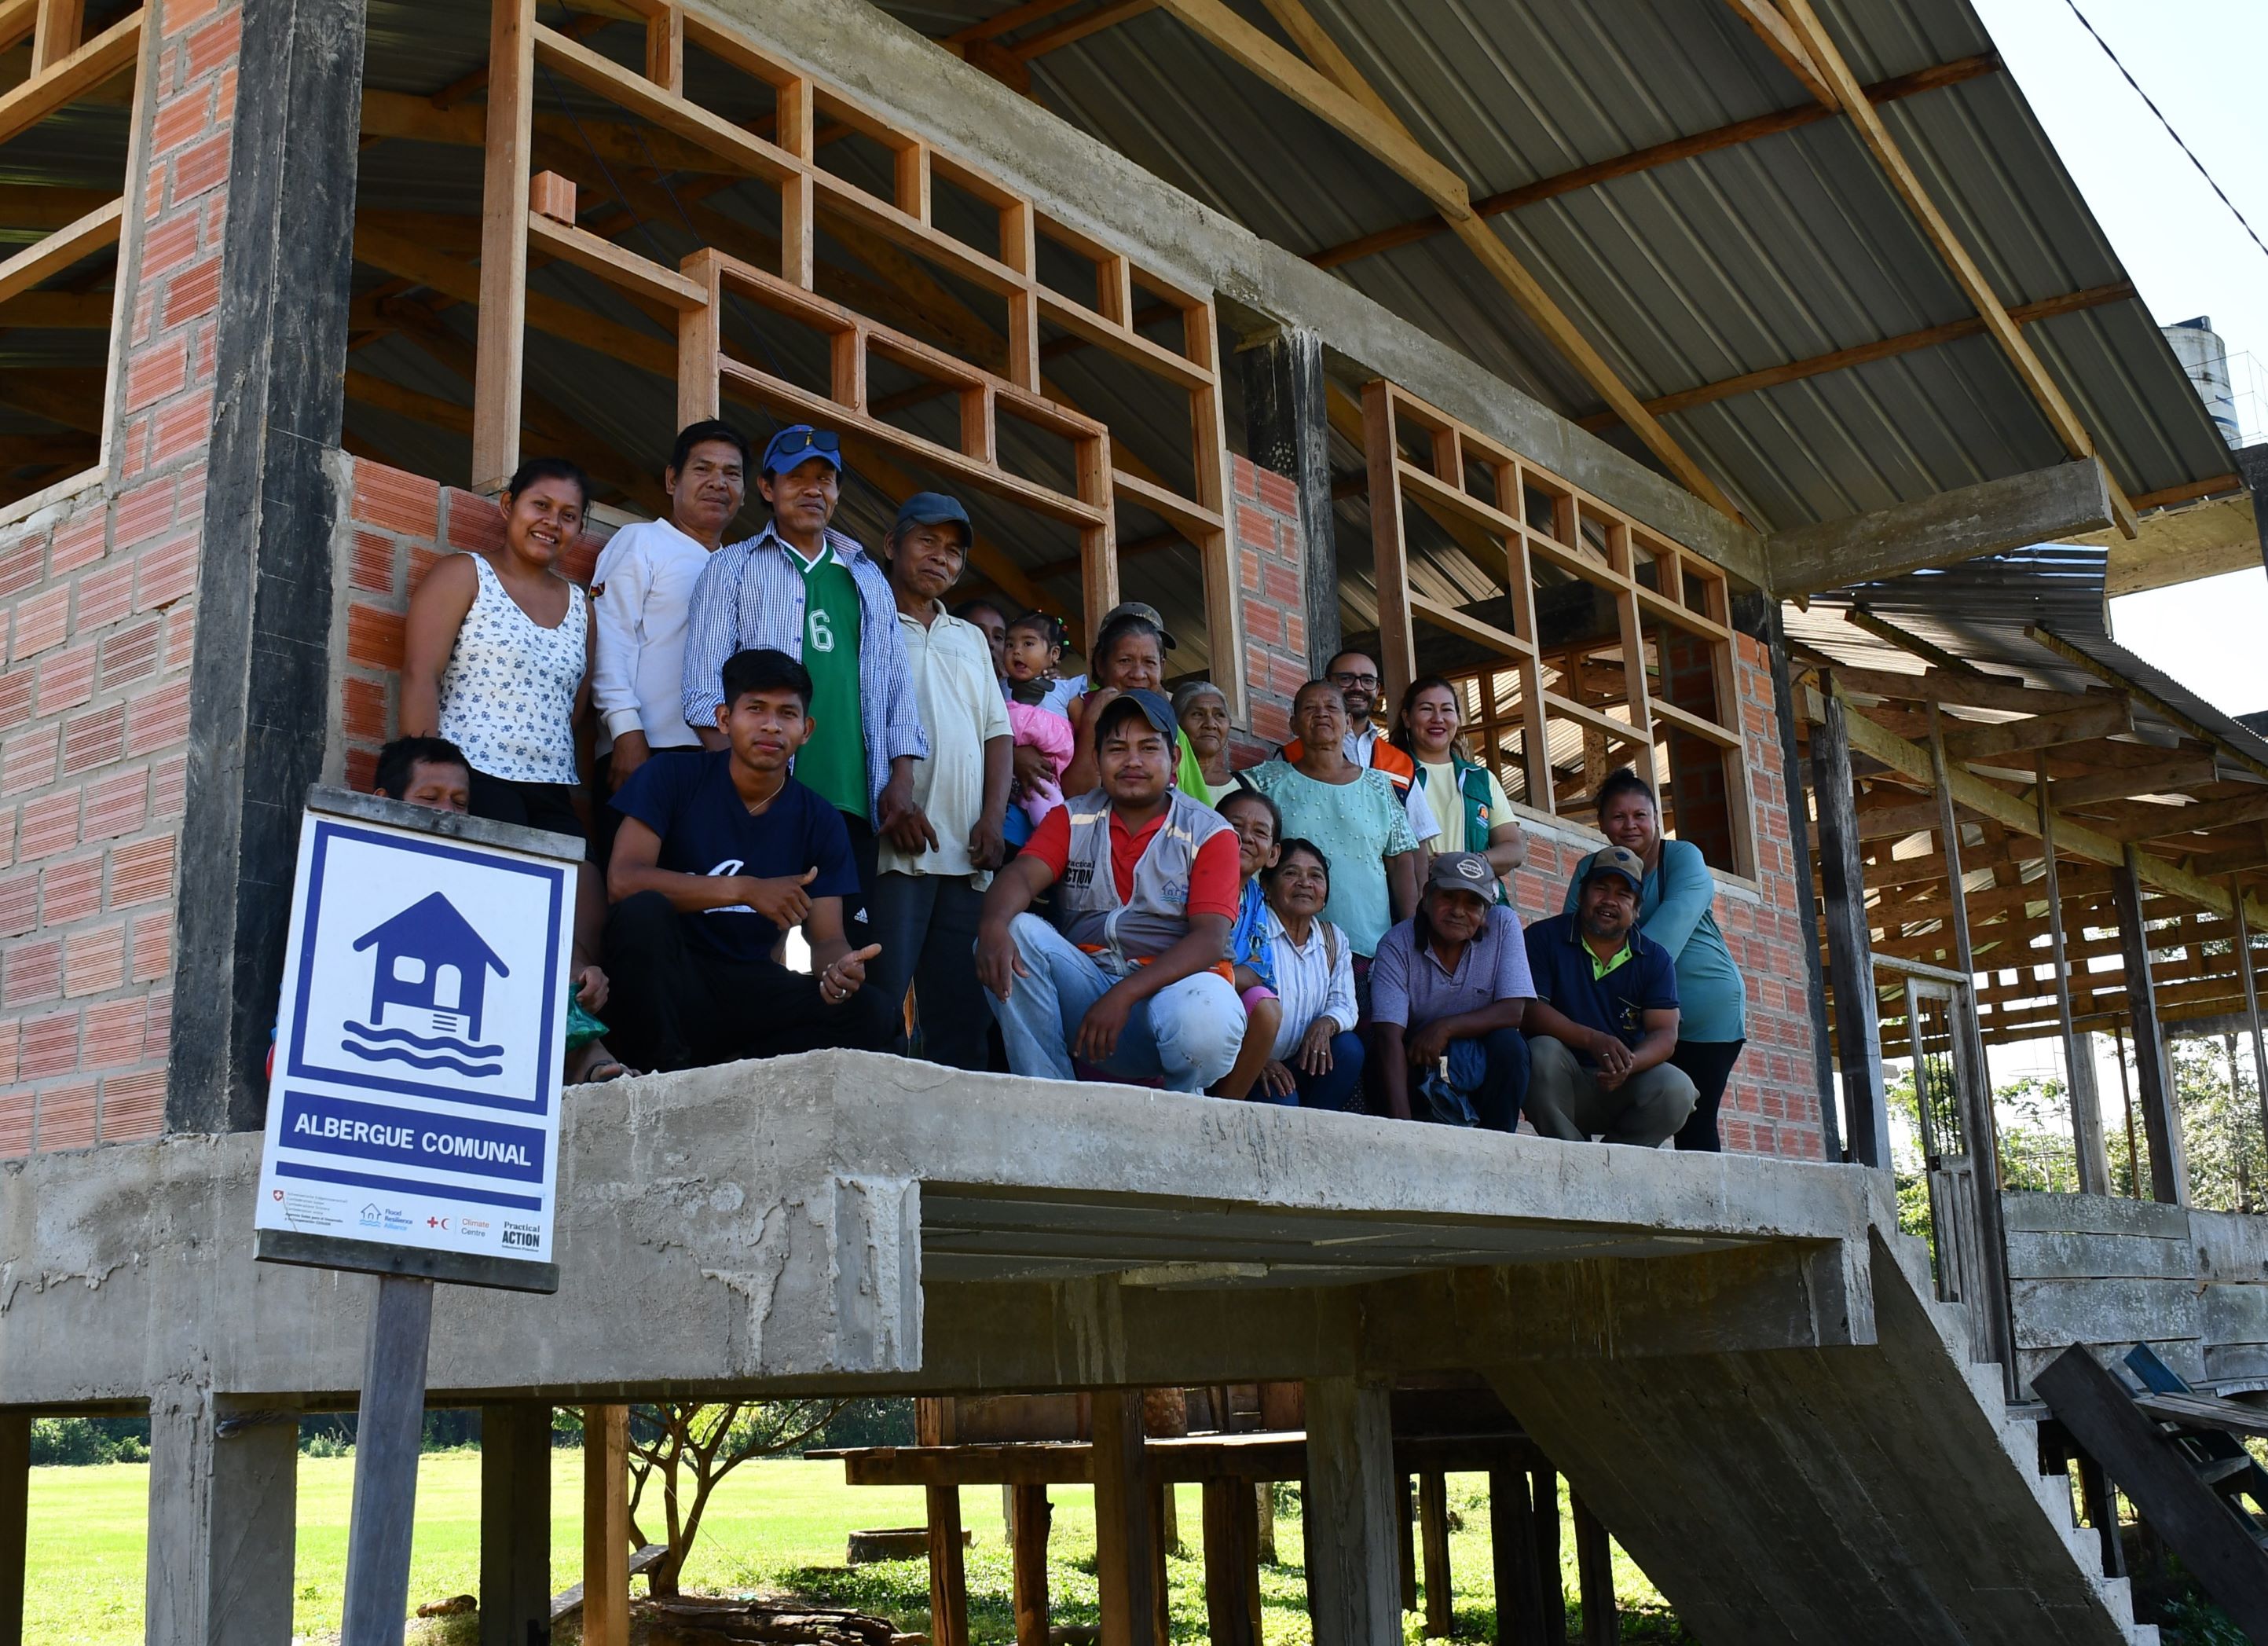 Group of people posing for a photo on the steps of a building under construction labeled "albergue comunal".